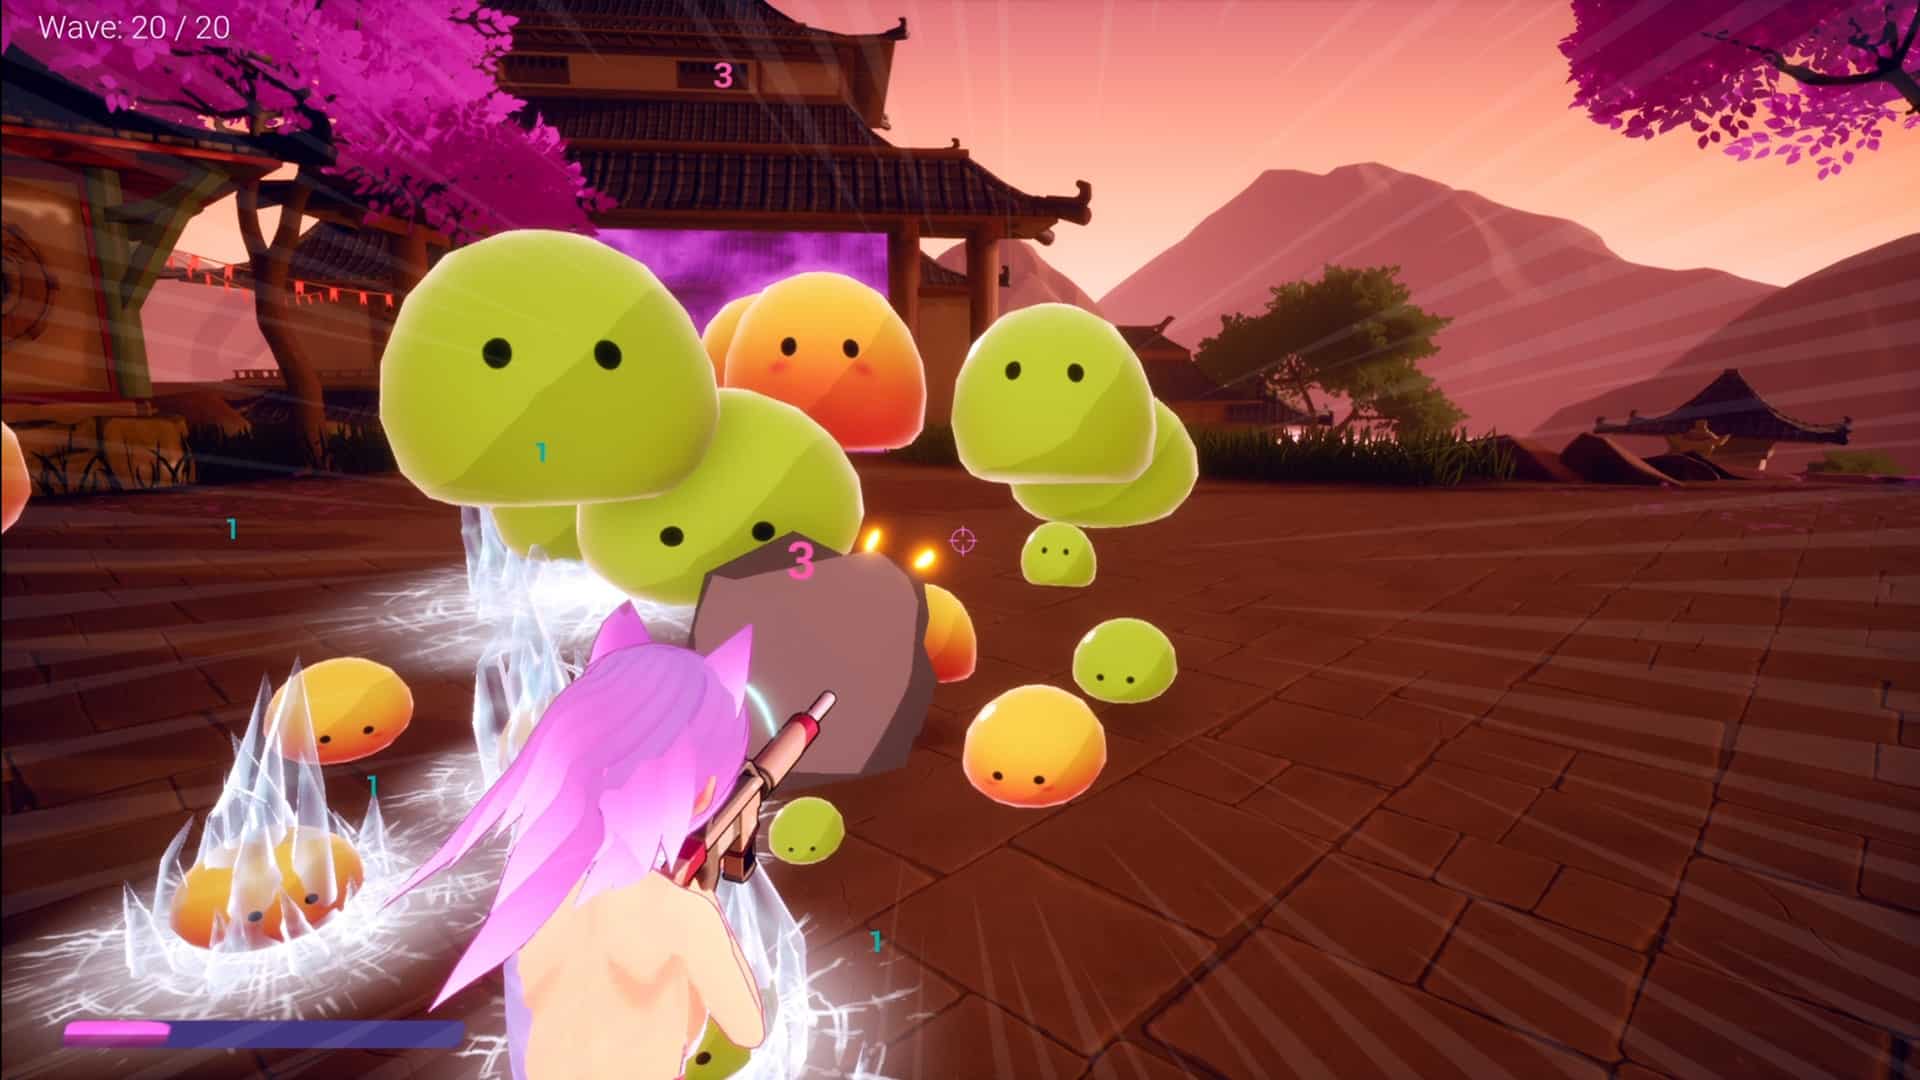 Roguelike Arena Shooter ‘Kawaii Slime Arena’ Launching for PS4, PS5 & Switch This Month